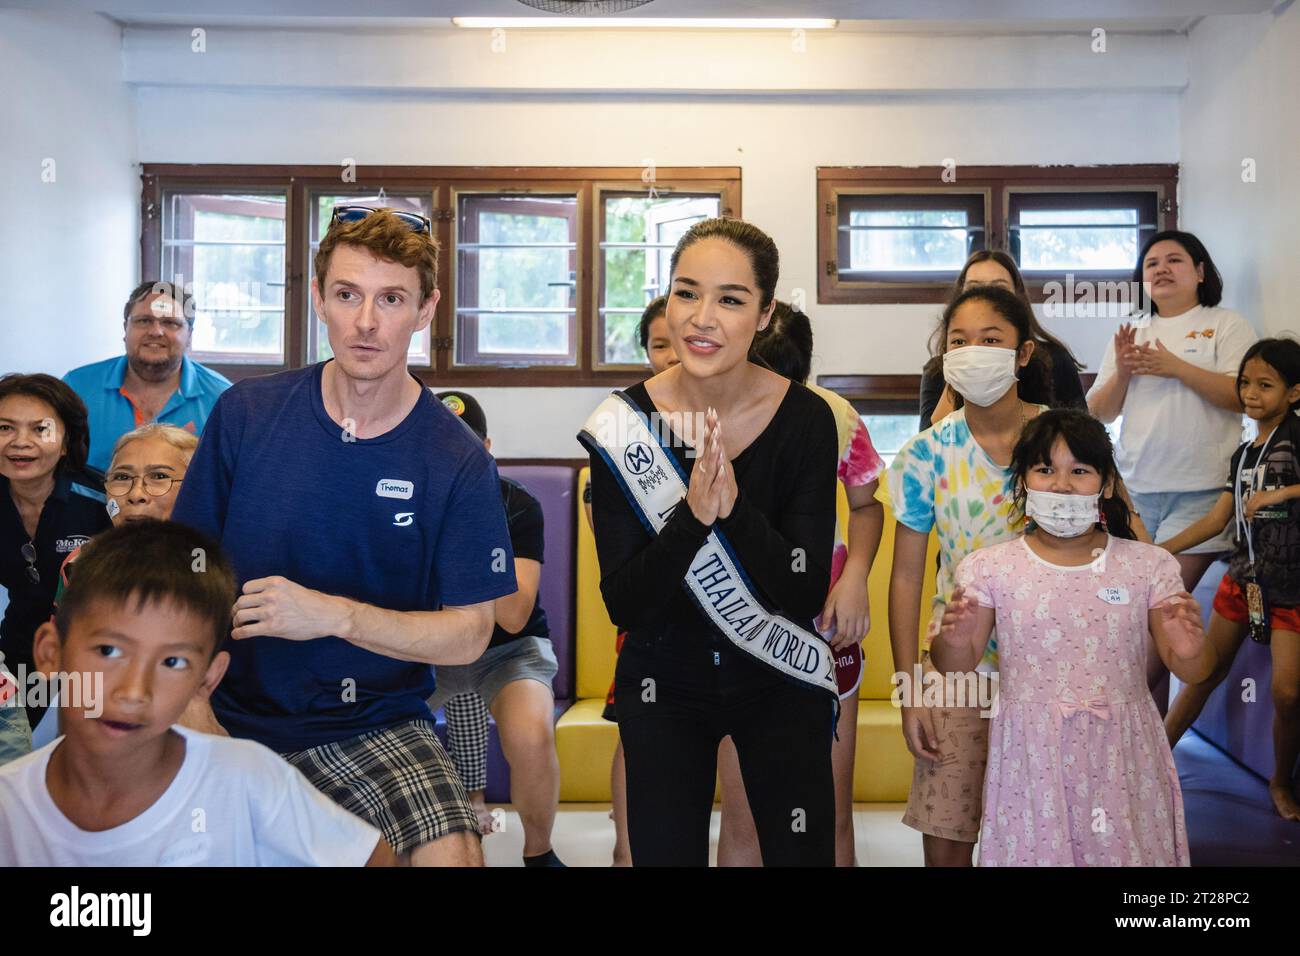 Bangkok, Thailand. 14th Oct, 2023. Tharina Botes, Miss Thailand World 2023 is seen among young children and adults from Klong Toei Bangkok's biggest slum, at the Bangkok Community Help Foundation Learning and Development Center, at Klong Toei, in Bangkok. Miss Thailand World 2023, Tharina Botes, mixed Thai-South African heritage joined as a volunteer in a free weekly English program for kids and adults, organized by the Bangkok Community Help Foundation, at Klong Toei, Bangkok's biggest slum. (Photo by Nathalie Jamois/SOPA Images/Sipa USA) Credit: Sipa USA/Alamy Live News Stock Photo